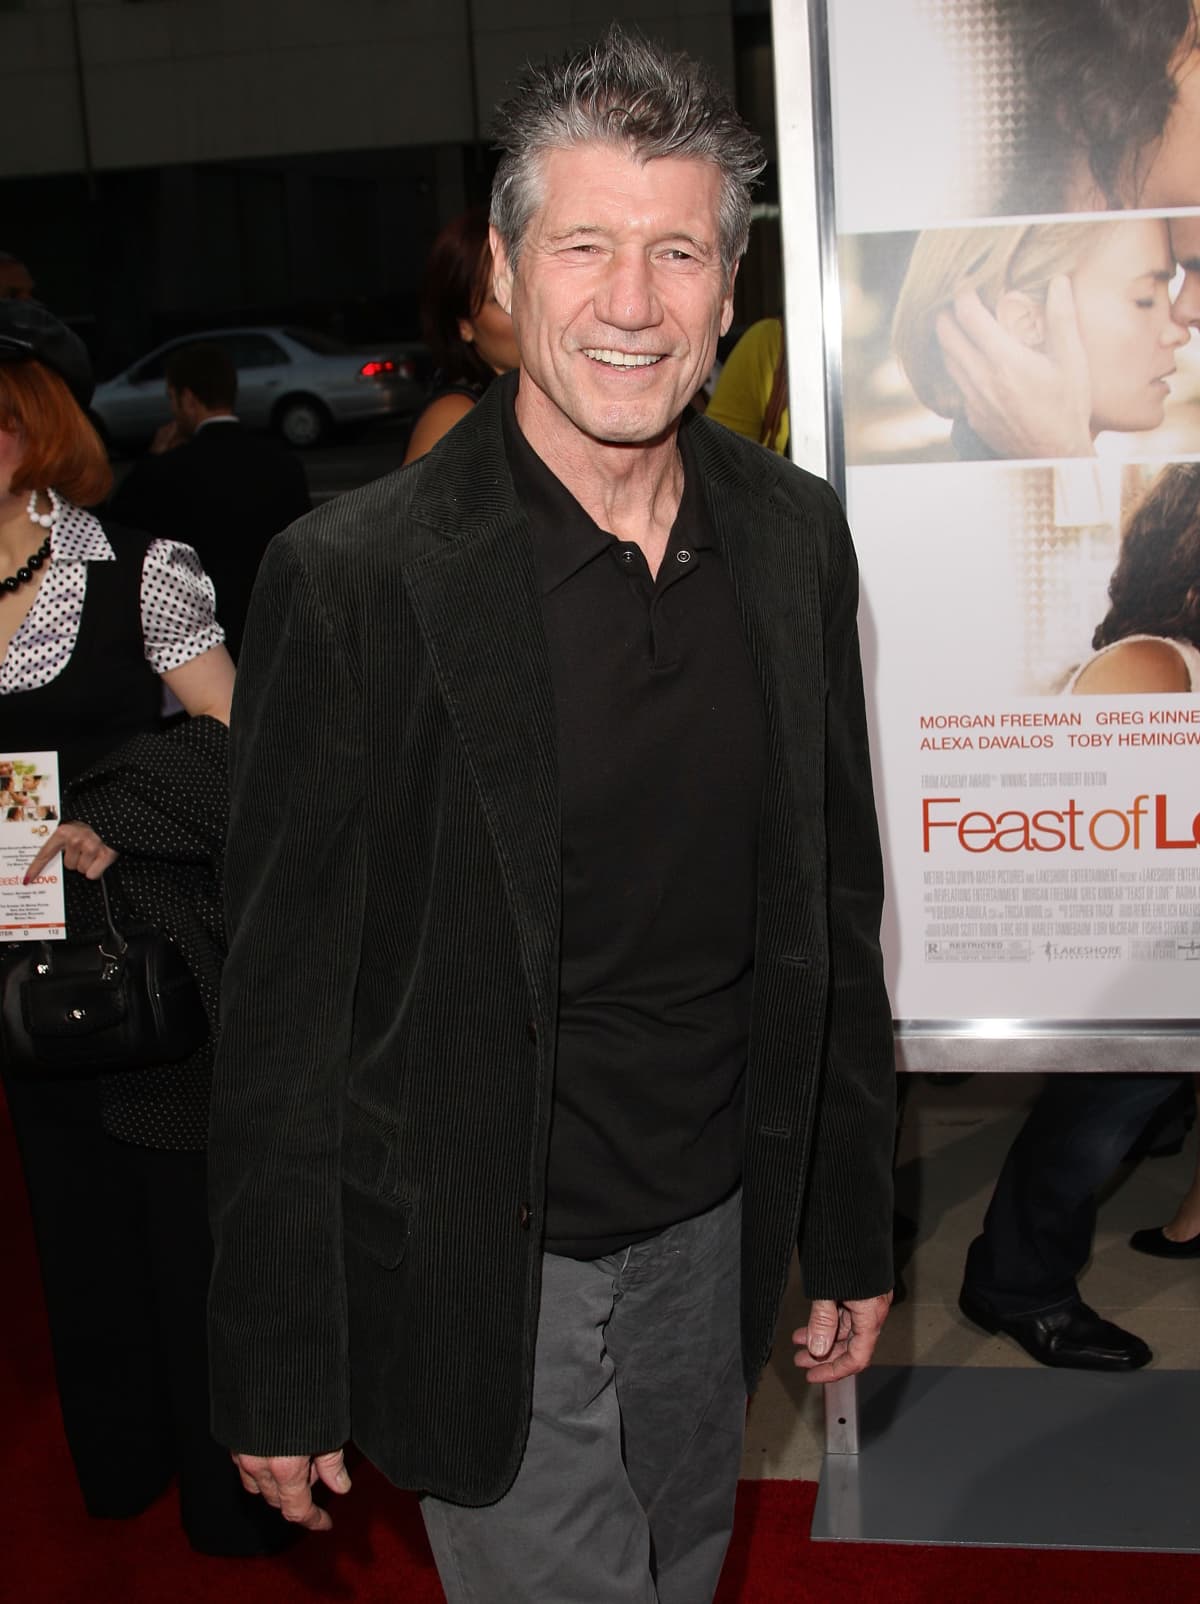 Actor Fred Ward arrives at the "Feast of Love" premiere at the Academy of Motion Pictures Art and Sciences on September 25, 2007 in Beverly Hills, California. (Photo by Jason Merritt/FilmMagic)